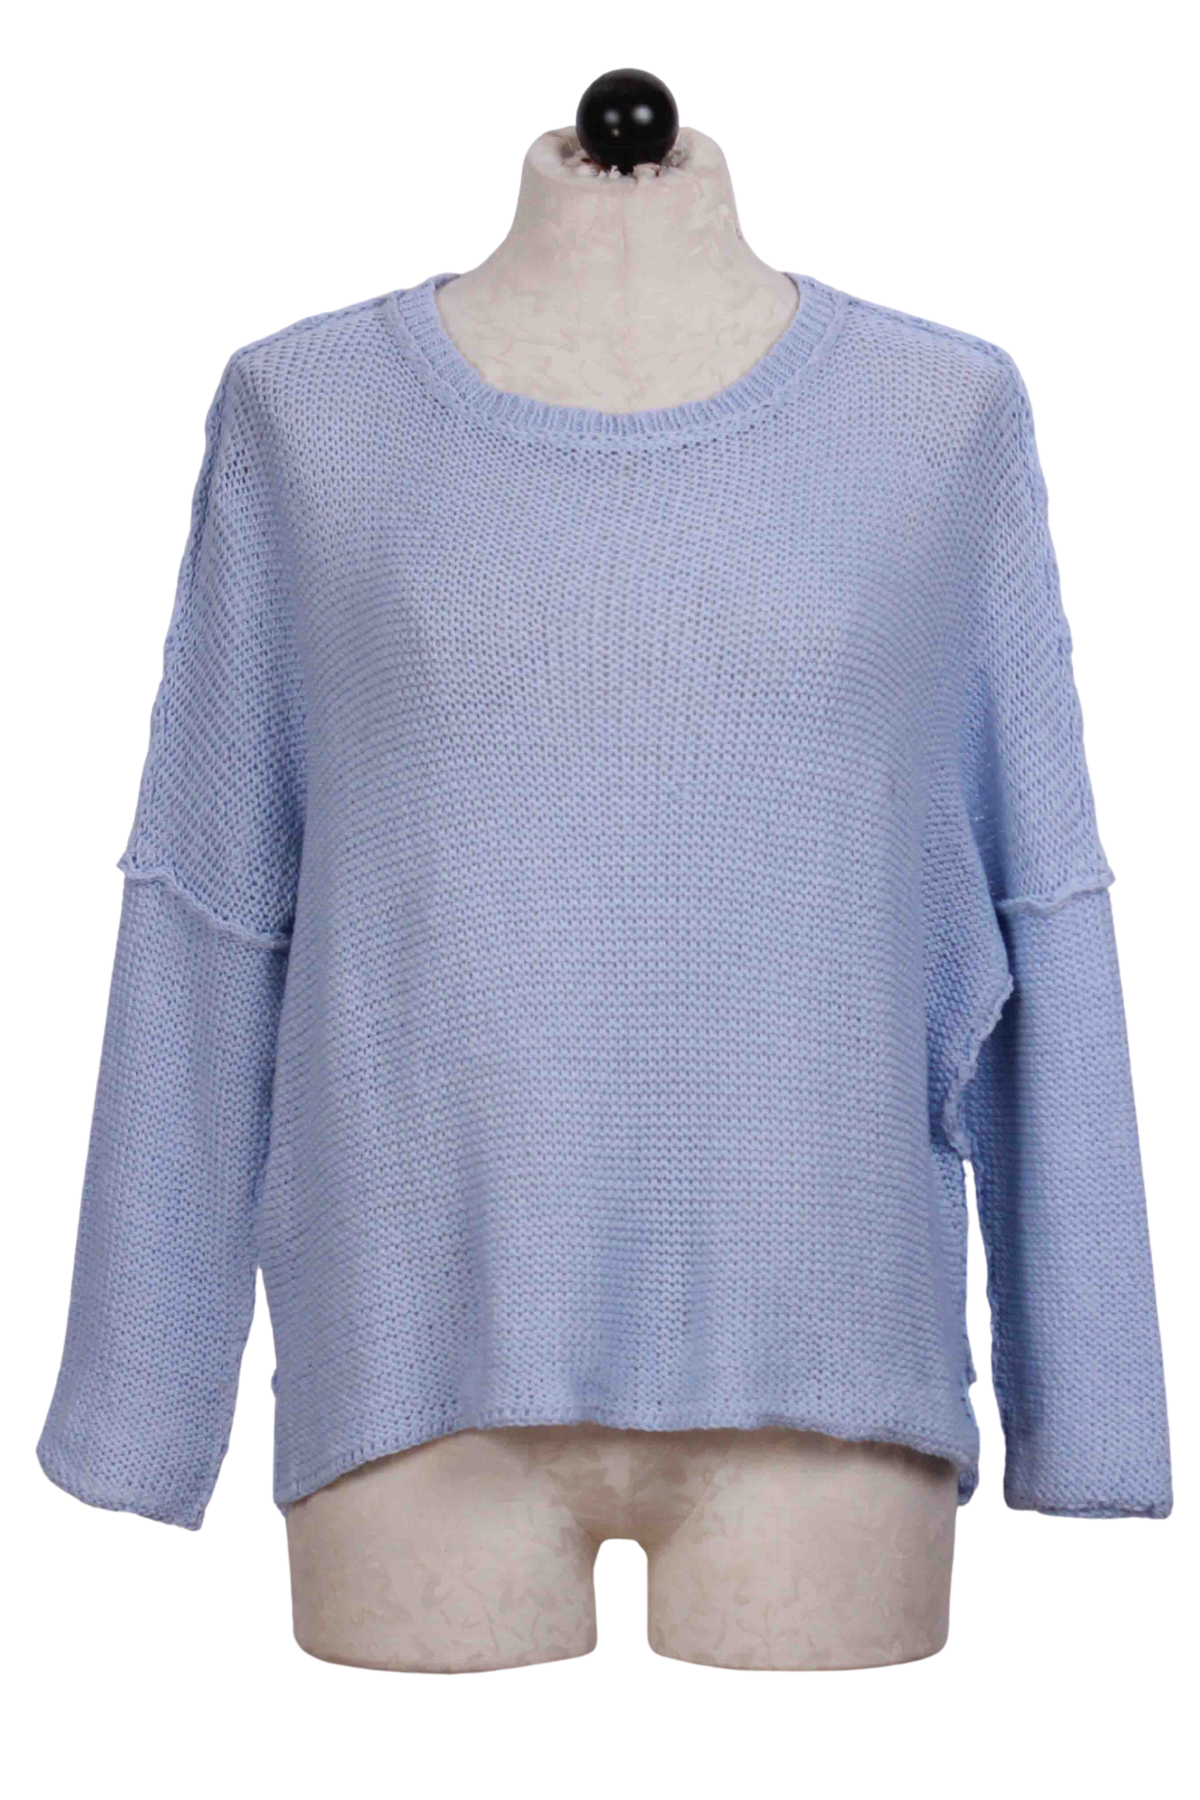 Blue Wisp Charlotte Crew Cotton Sweater by Wooden Ships